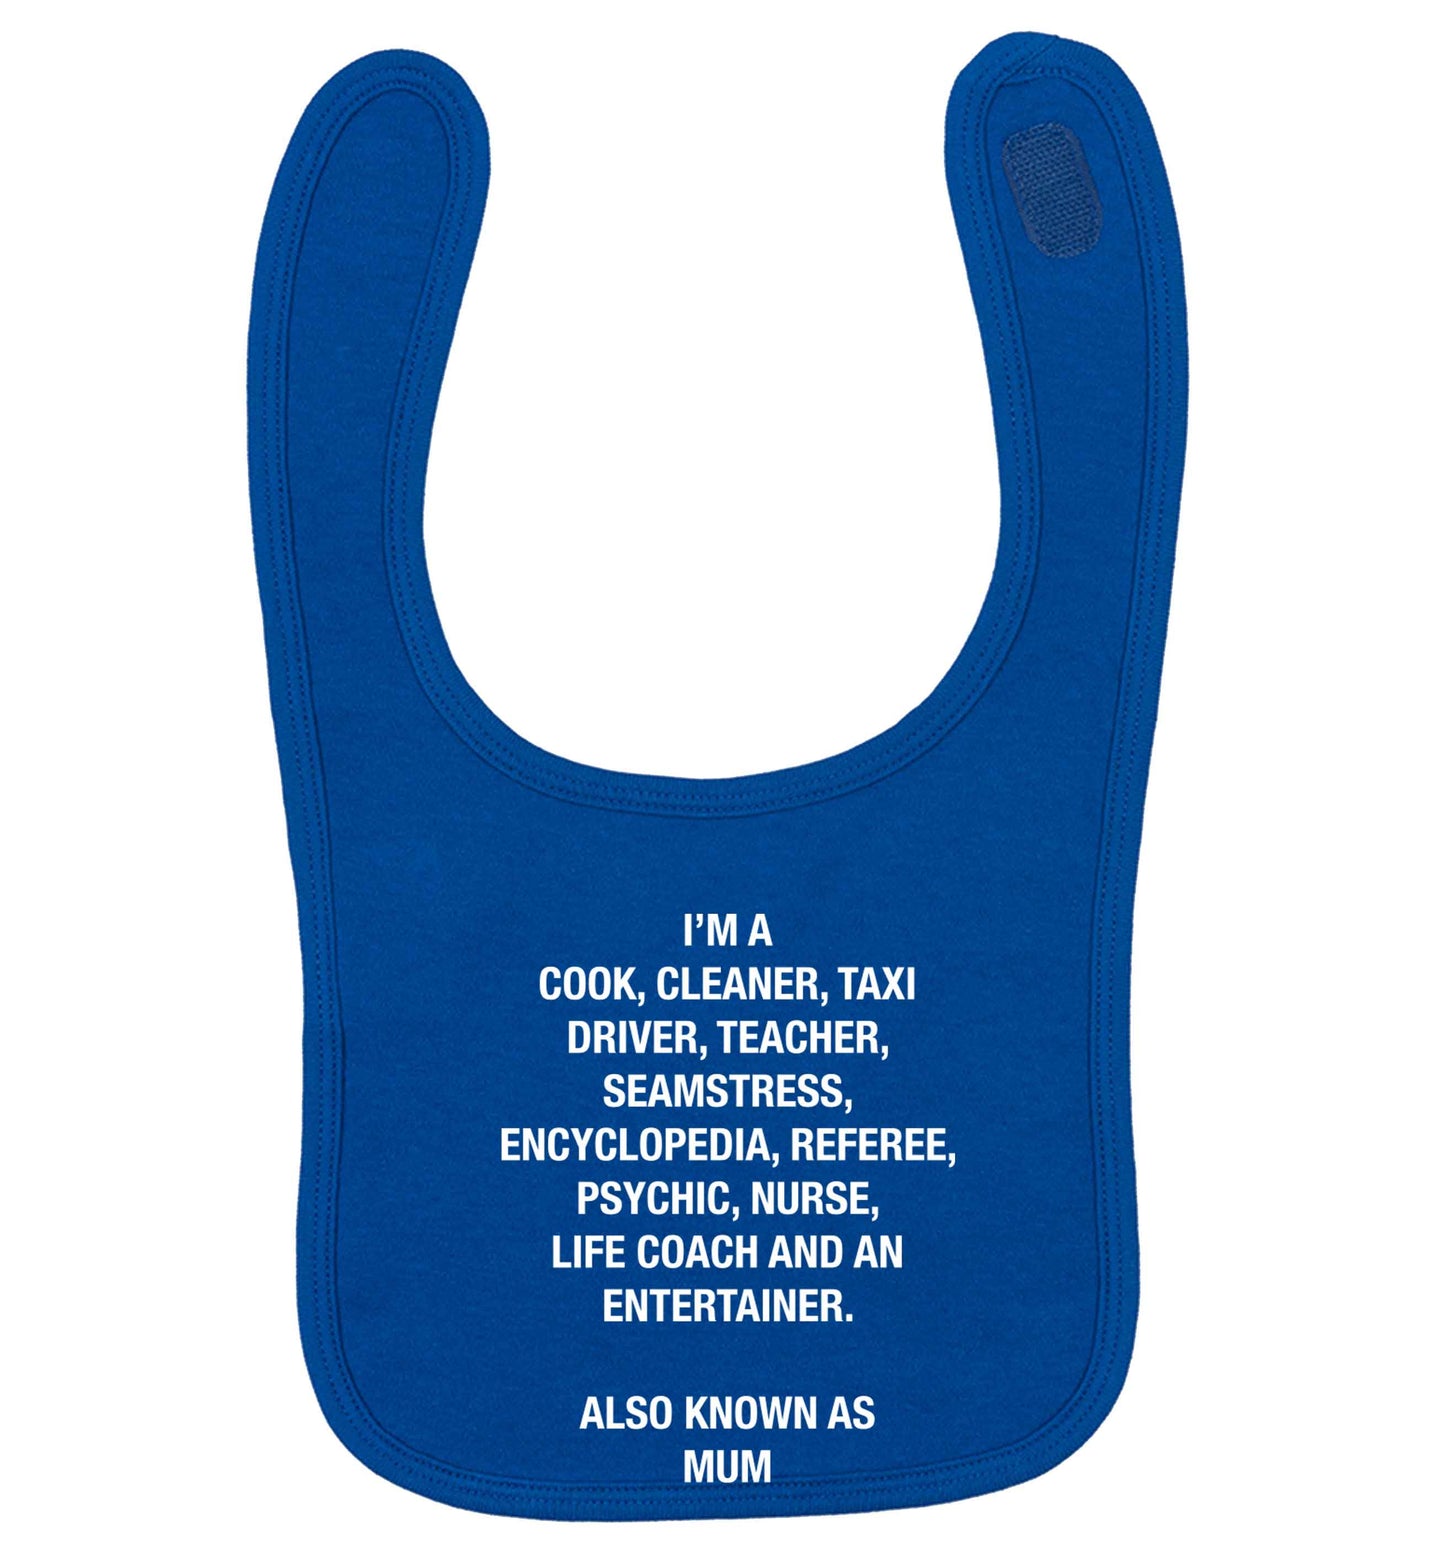 Funny gifts for your mum on mother's dayor her birthday! Mum, cook, cleaner, taxi driver, teacher, seamstress, encyclopedia, referee, psychic, nurse, life coach and entertainer royal blue baby bib